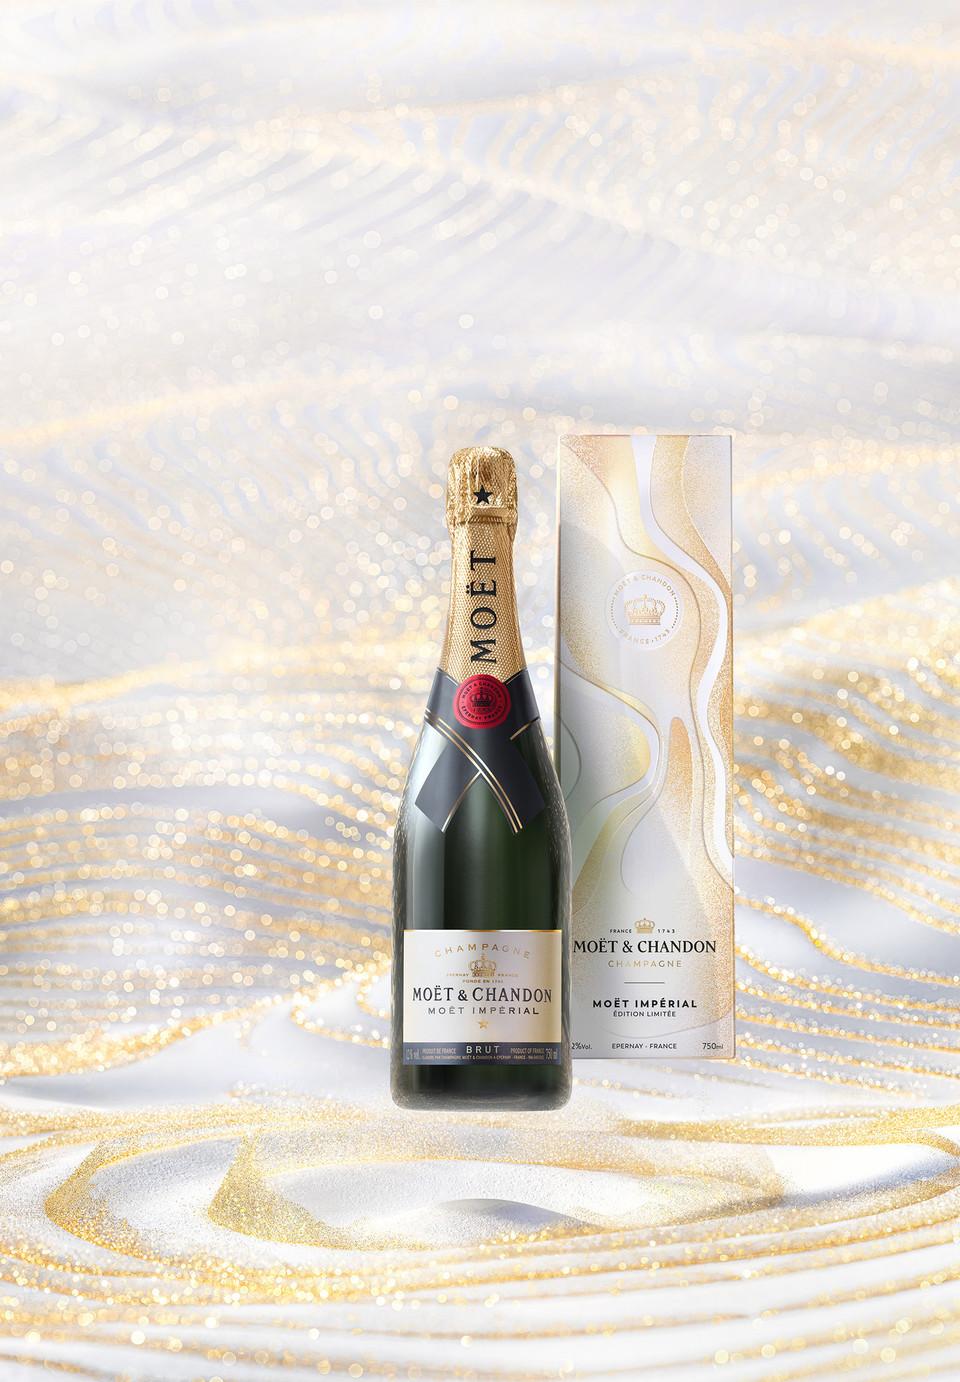 Moët Impérial gift box モエ アンぺリアル ゴールデンテロワール 